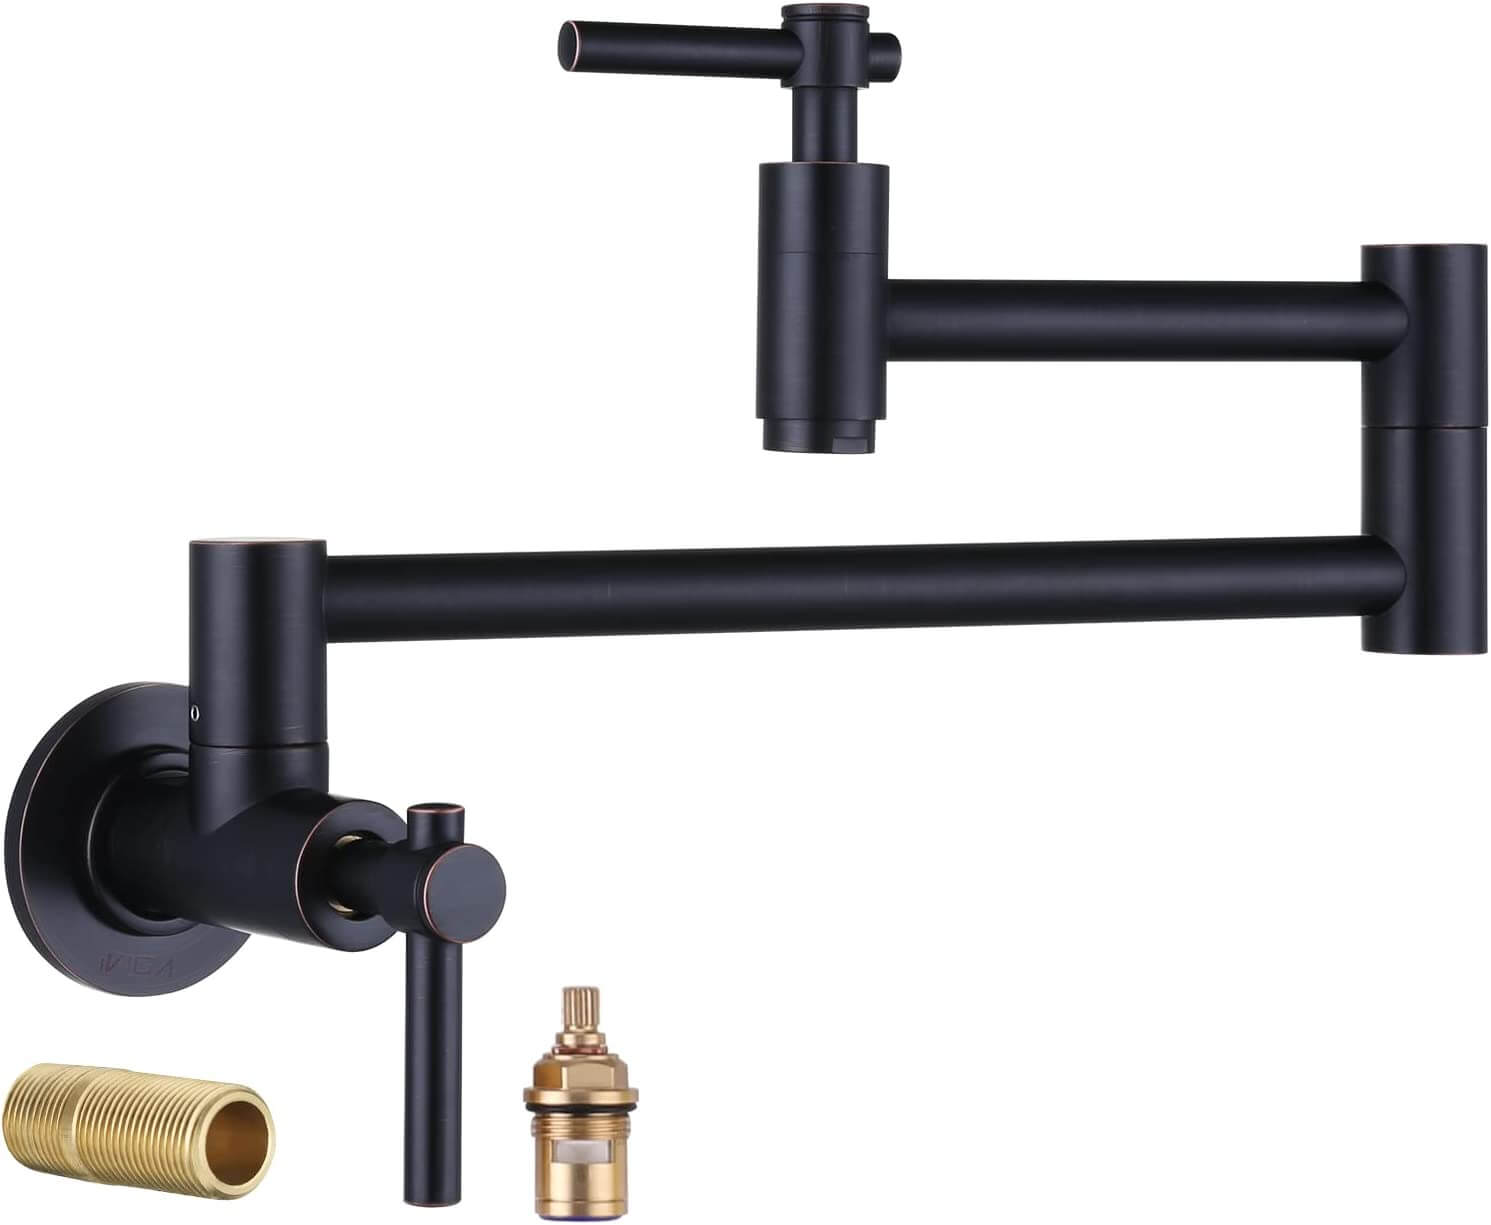 iVIGA Wall Mount Oil Rubbed Bronze Pot Filler Faucet with Double Joint Swing Arm